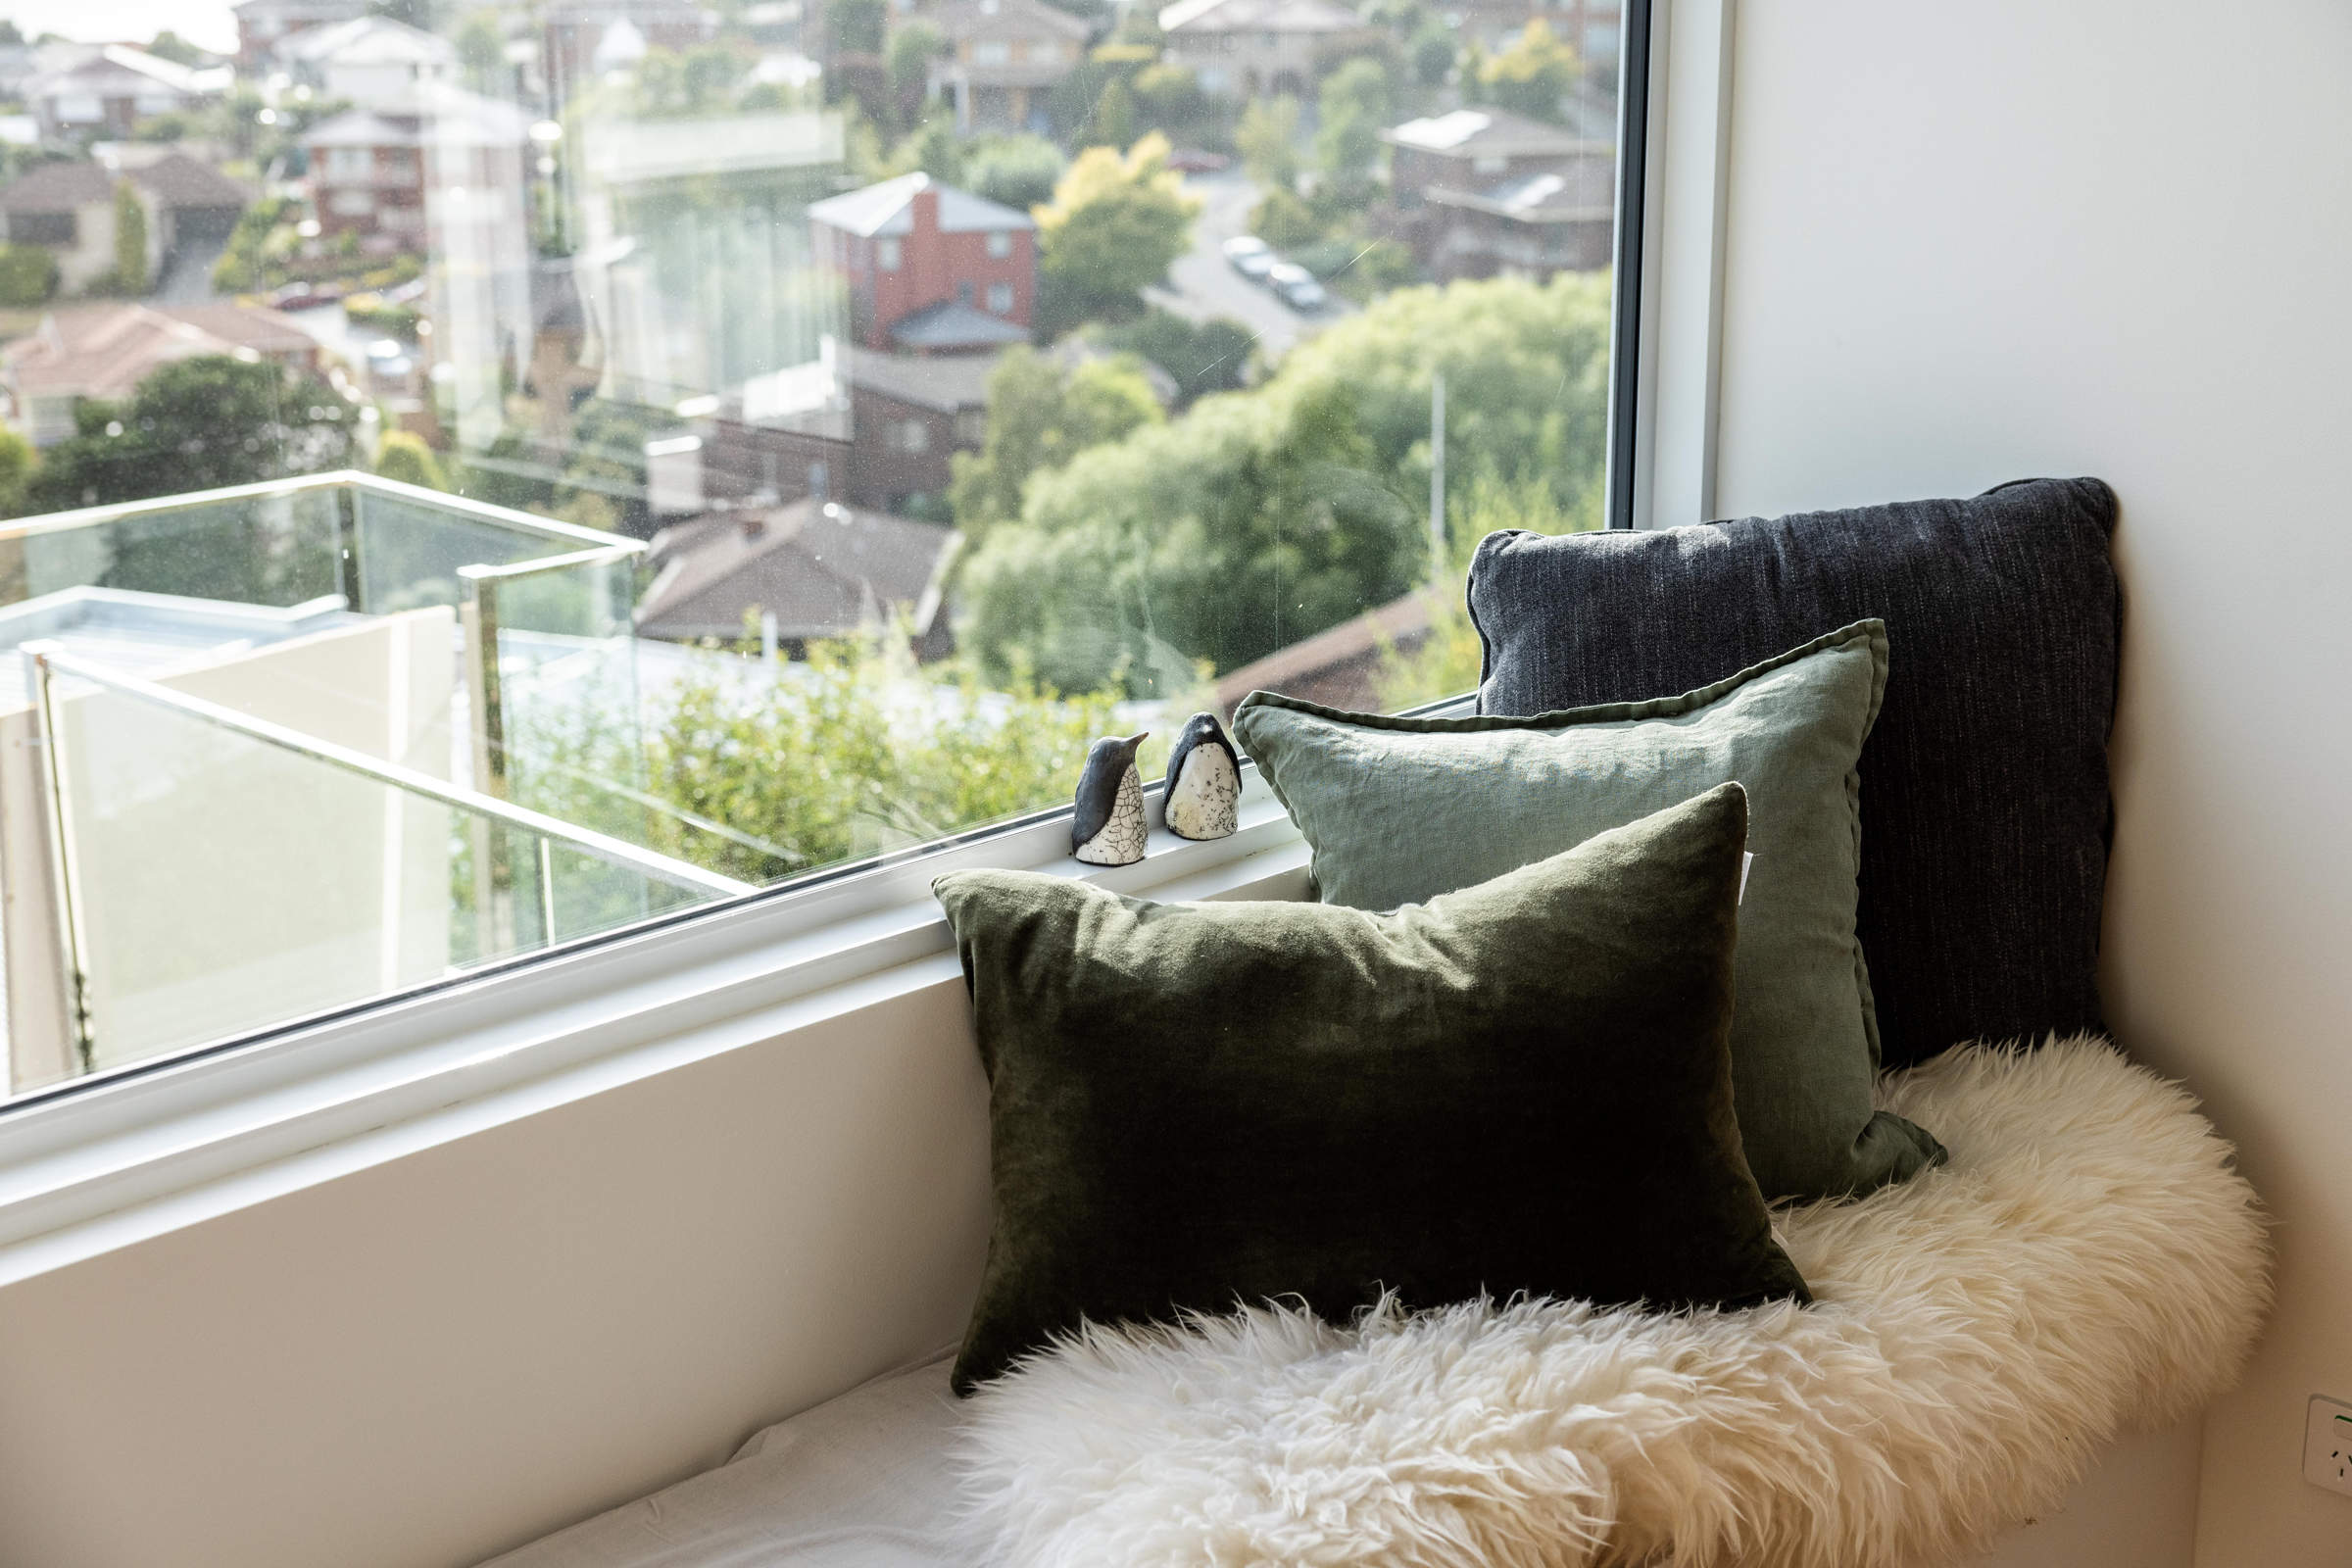 A lovely element of the lifestyle renovation of this 1970s house is the new window seat to take advantage of the water view and look out over the new deck extension. Photo: Jordan Davis.